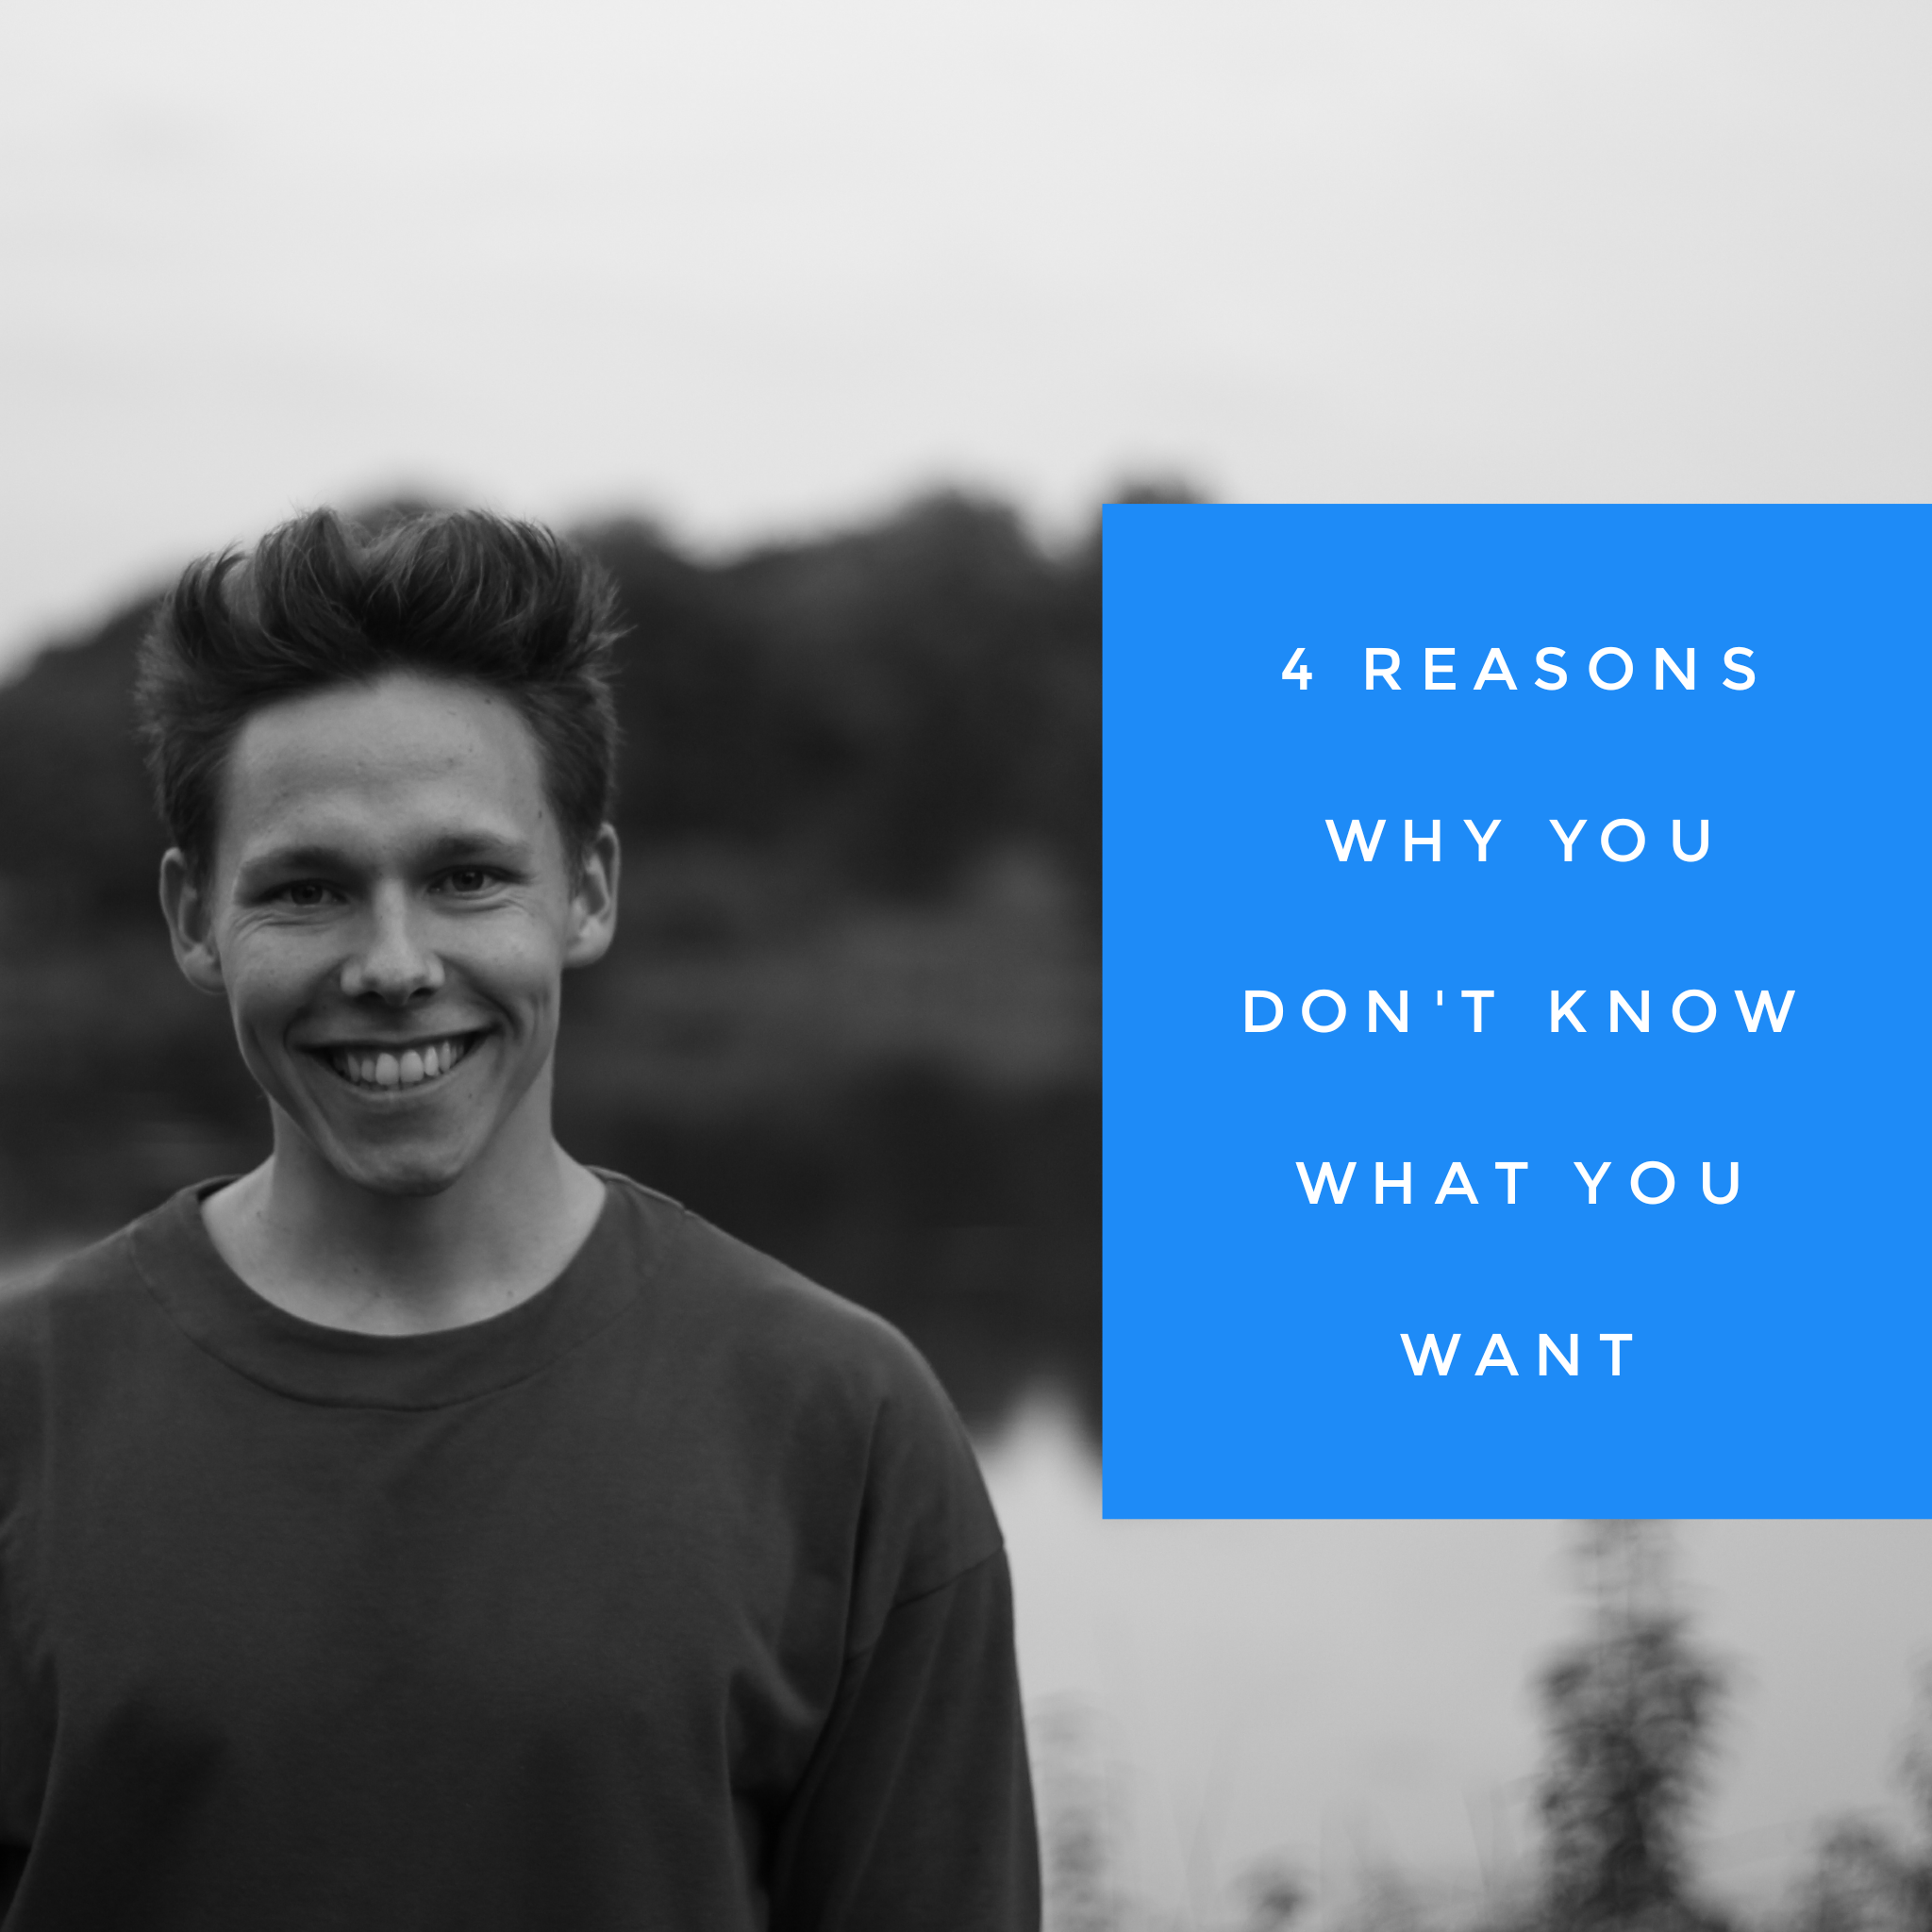 4 Reasons Why You don’t Know what You Want